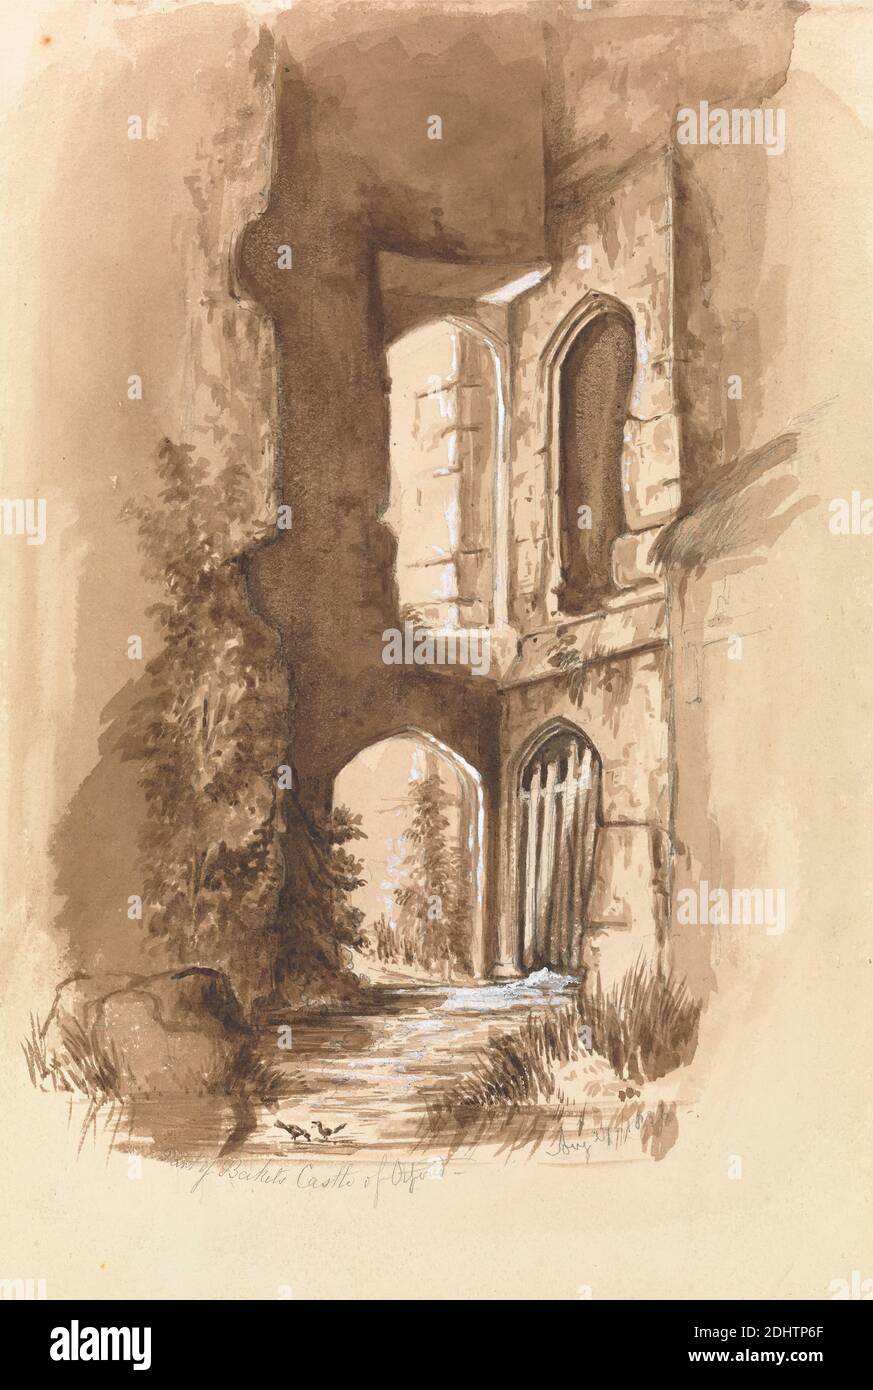 Part of Becket's Castle, Otford, unknown artist, between 1826 and 1866, Brown wash heightened with white gouache over graphite, Sheet: 10 1/2 x 7 1/16in. (26.7 x 17.9cm Stock Photo